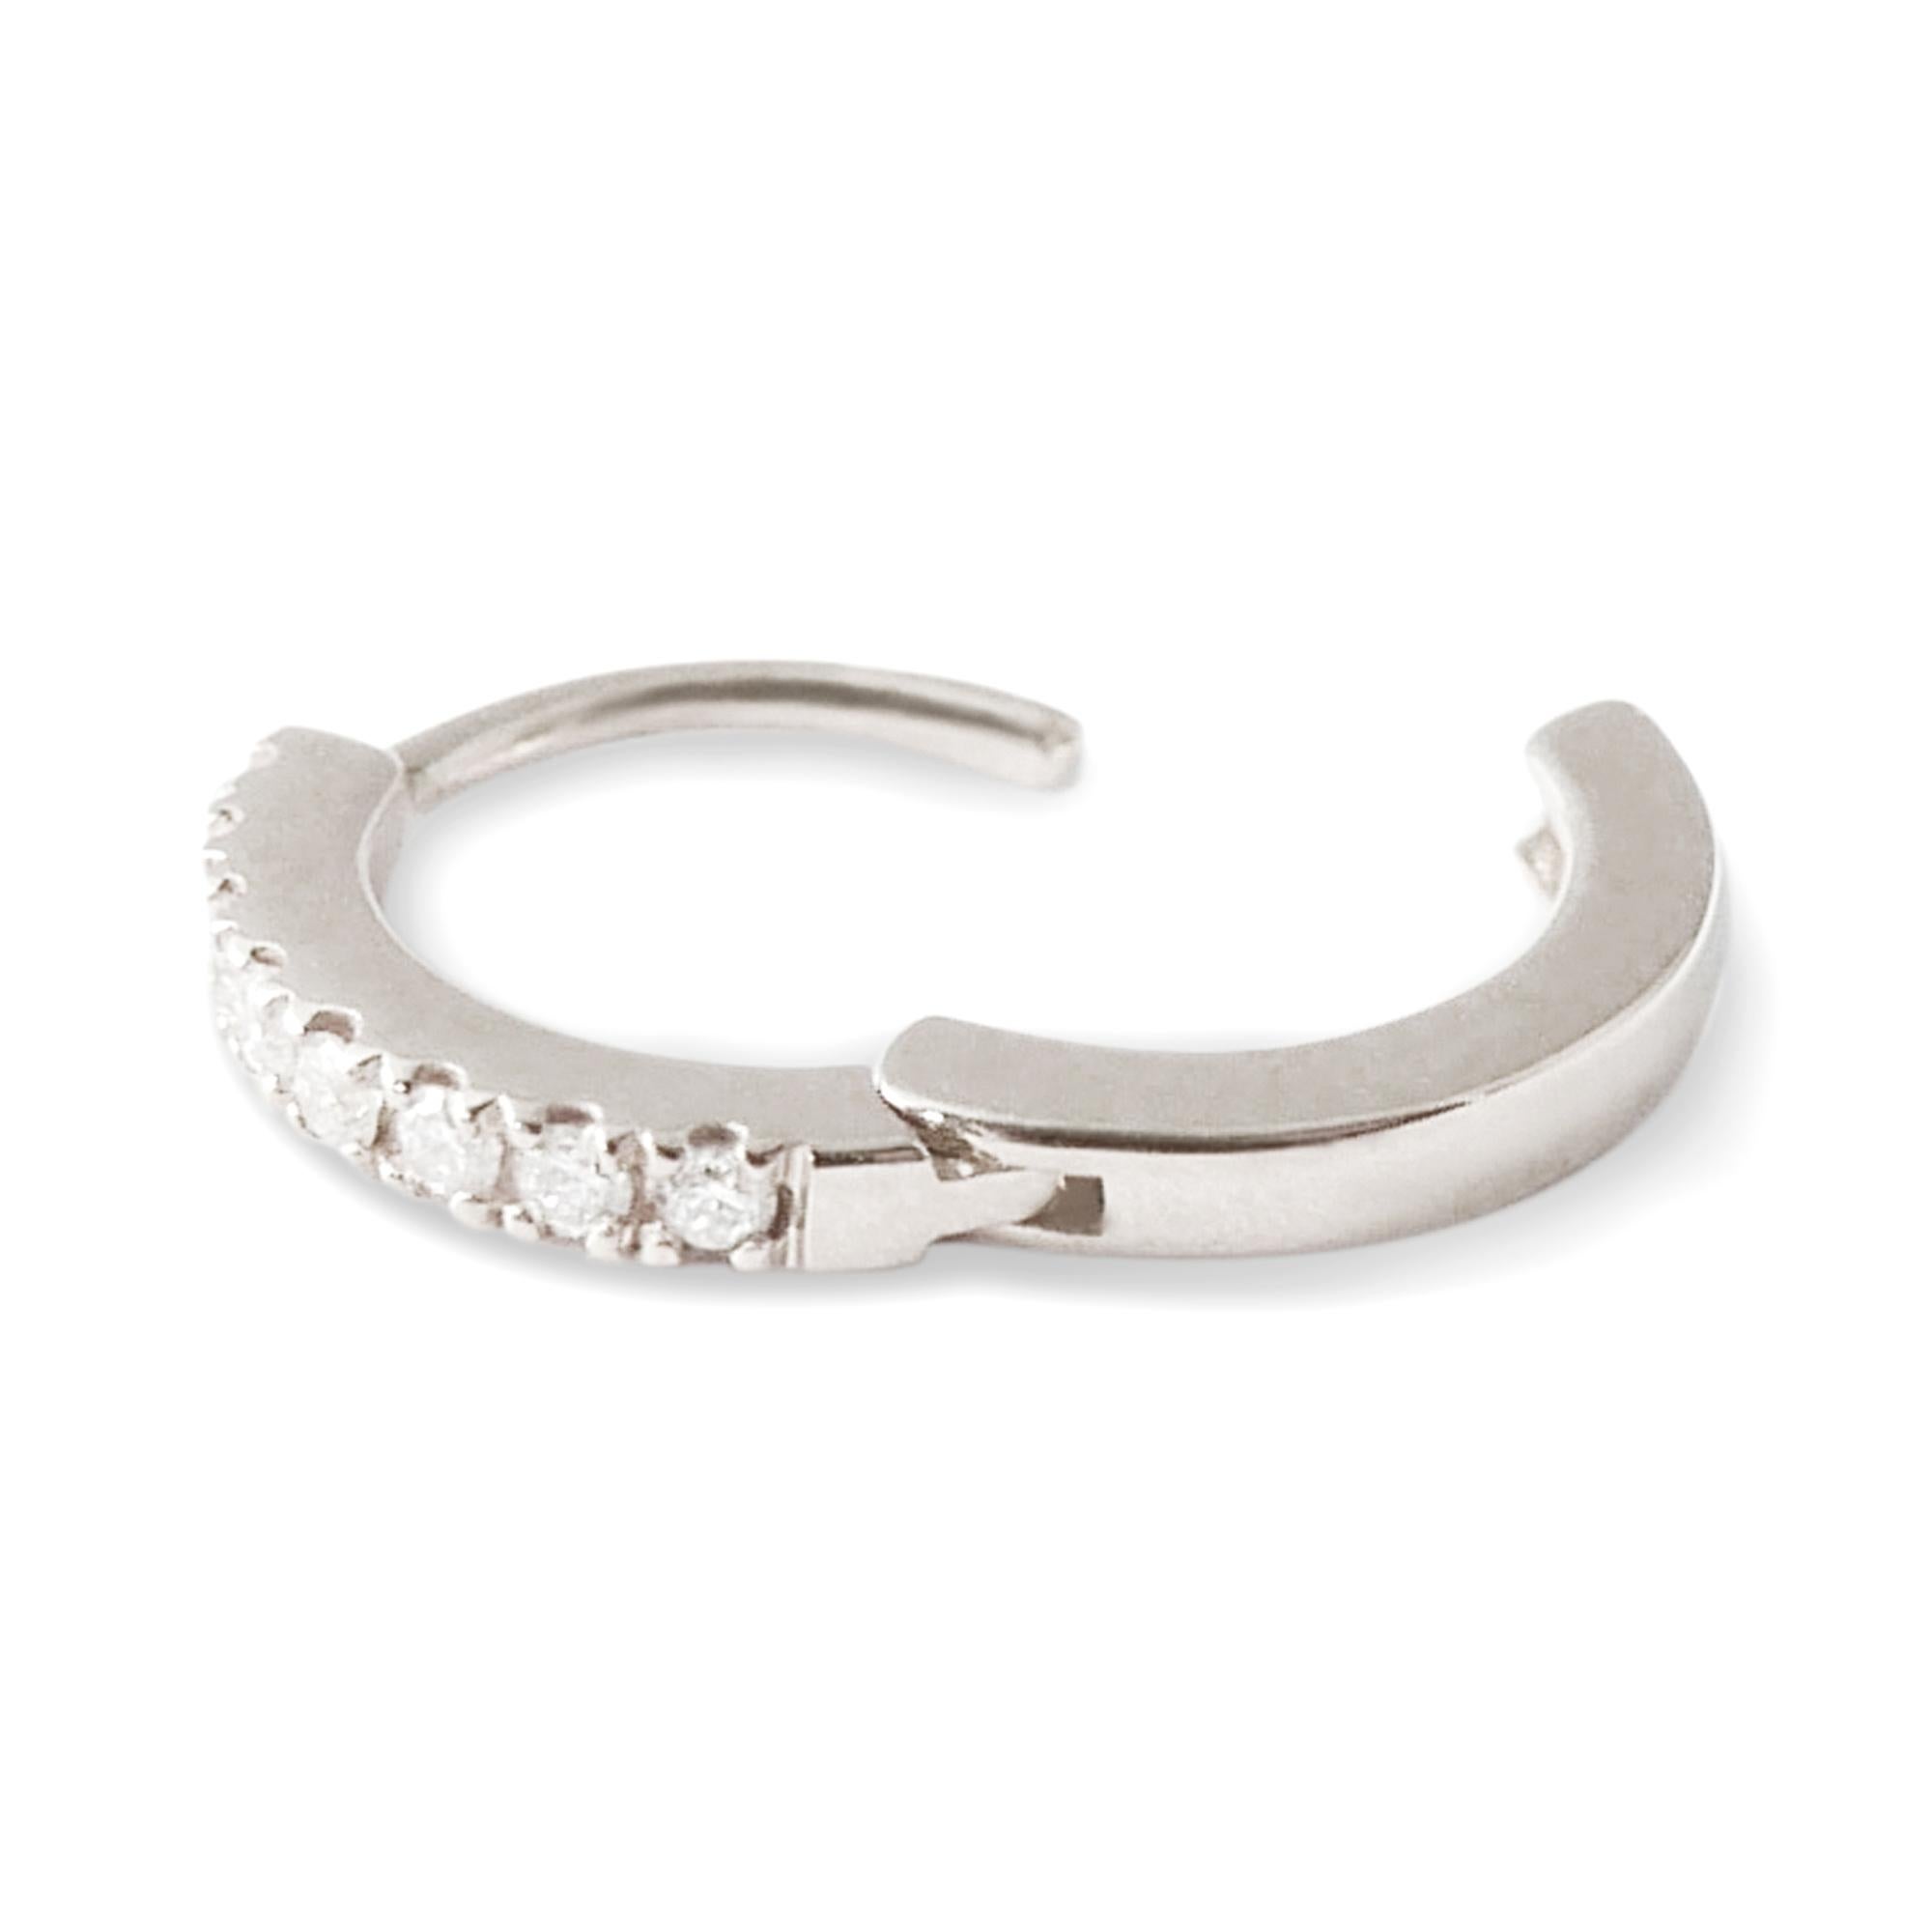 This pair of delicate huggie hoop earrings is crafted in 18-karat white gold and set with 0.08 carats of white pave diamonds.  The earrings feature a classic 18-karat white gold pave setting and a click post fastening for a secure and close fit. 